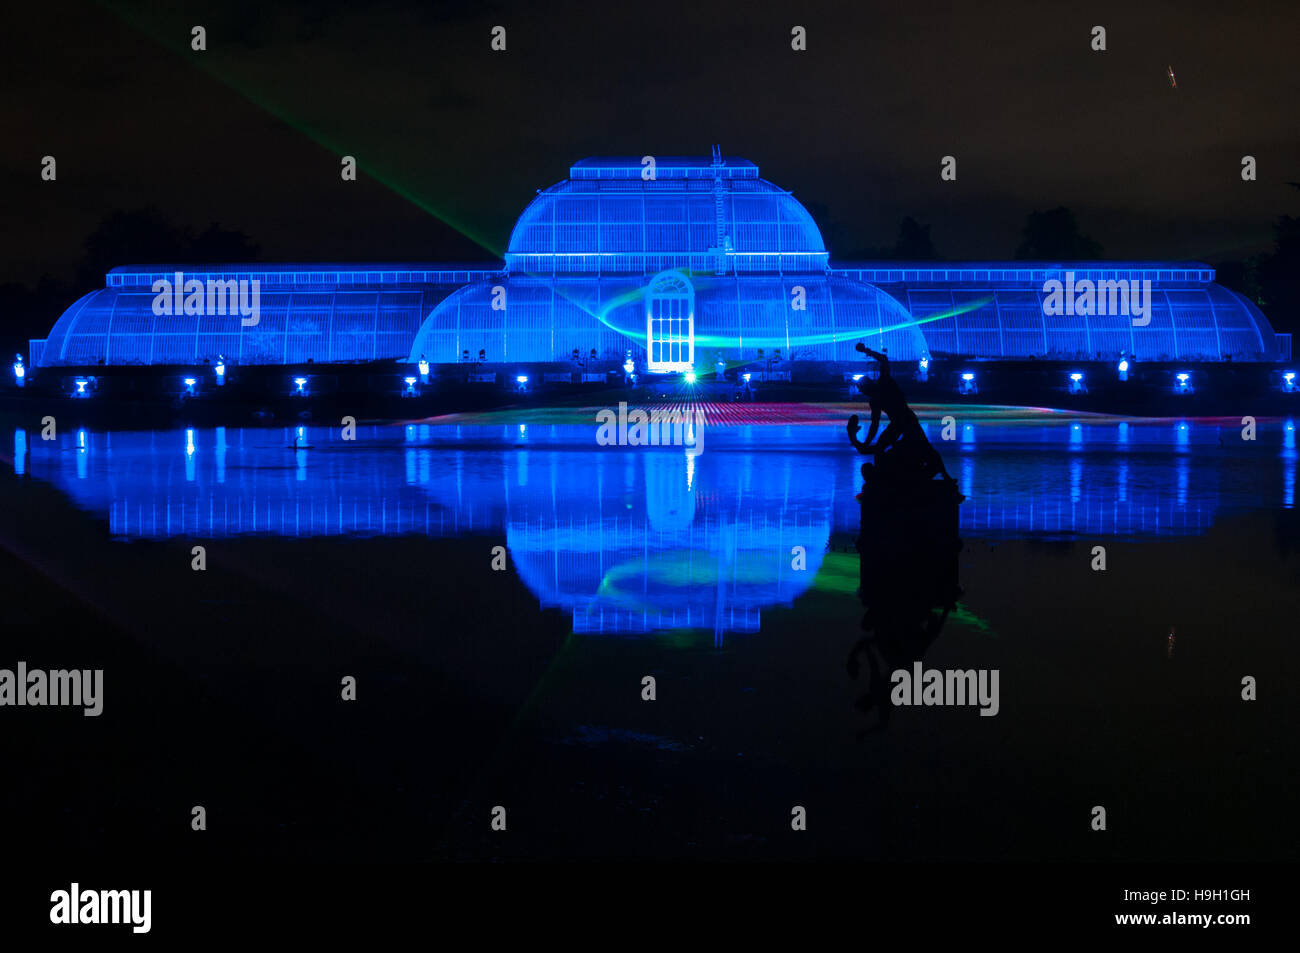 London, UK. 22nd November, 2016. The Palm House illuminated with laser beams for the Christmas at Kew Light Trail 2016. More than 60,000 lights light up the trees, plants and gardens. The trail is more than a mile long and includes artworks from both UK and international artists and designers. The trail opens on 23rd November and lasts till 2nd January 2017. Credit:  Tricia de Courcy Ling/Alamy Live News Stock Photo